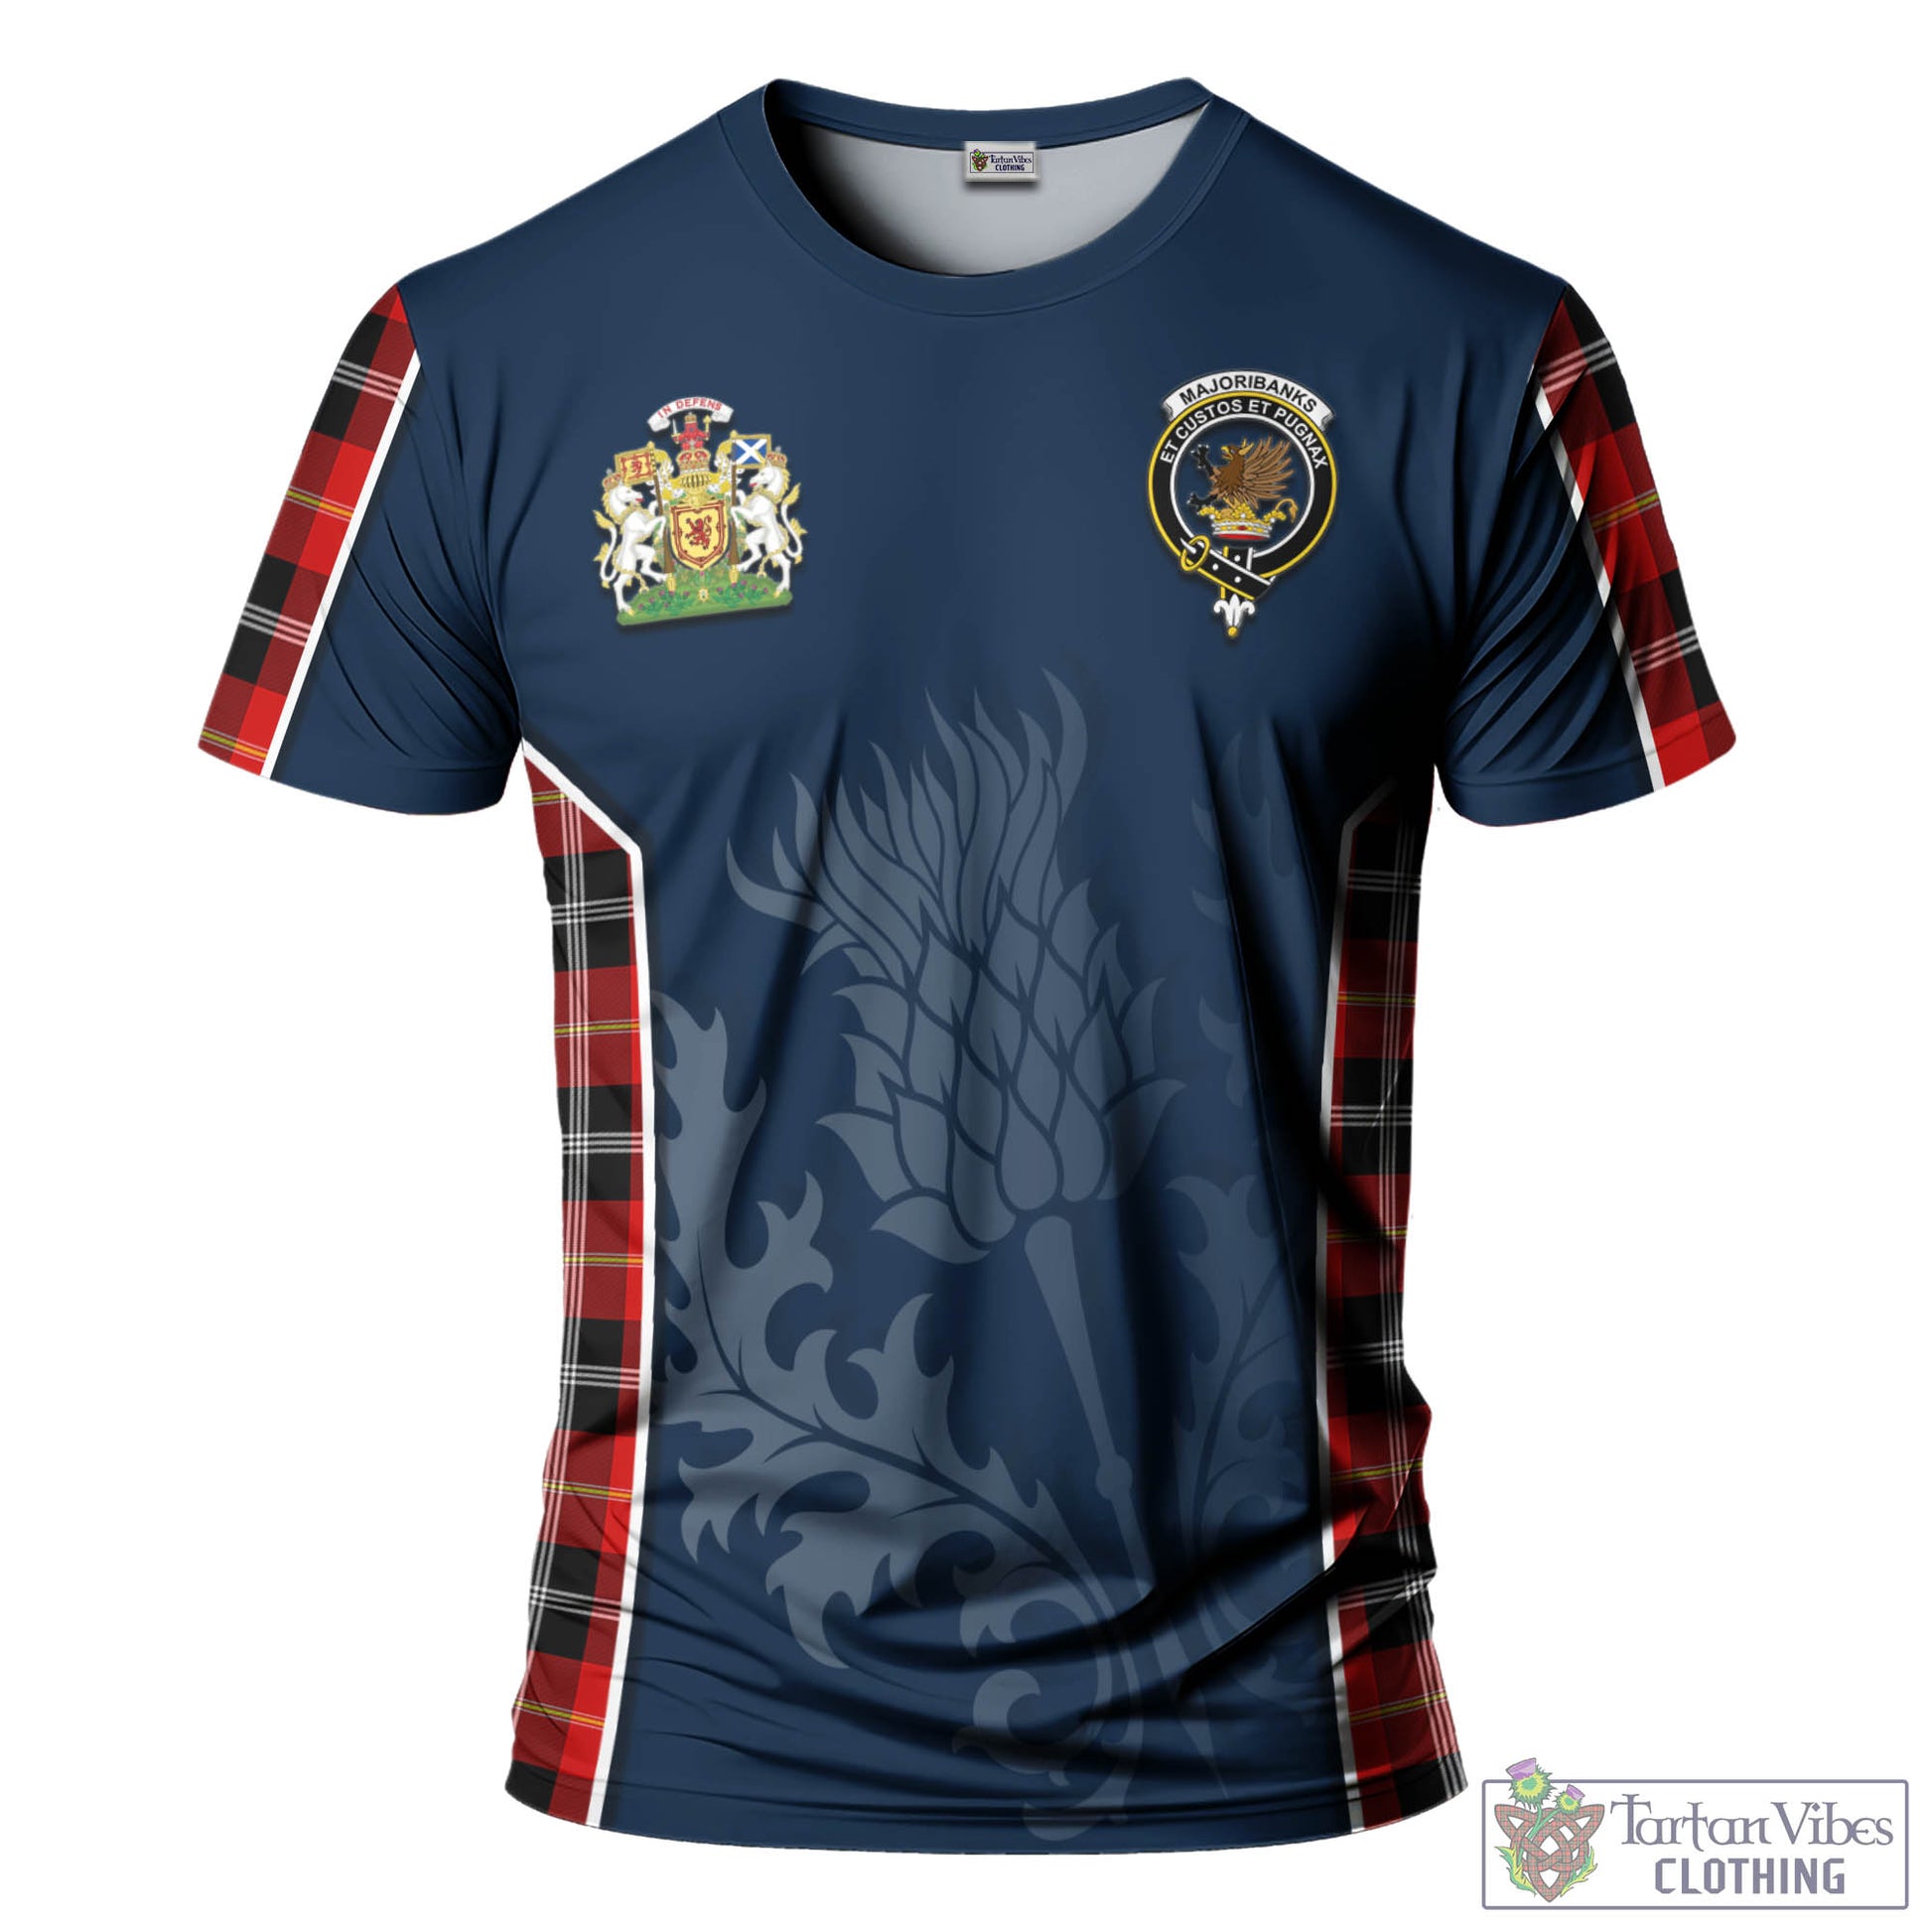 Tartan Vibes Clothing Majoribanks Tartan T-Shirt with Family Crest and Scottish Thistle Vibes Sport Style